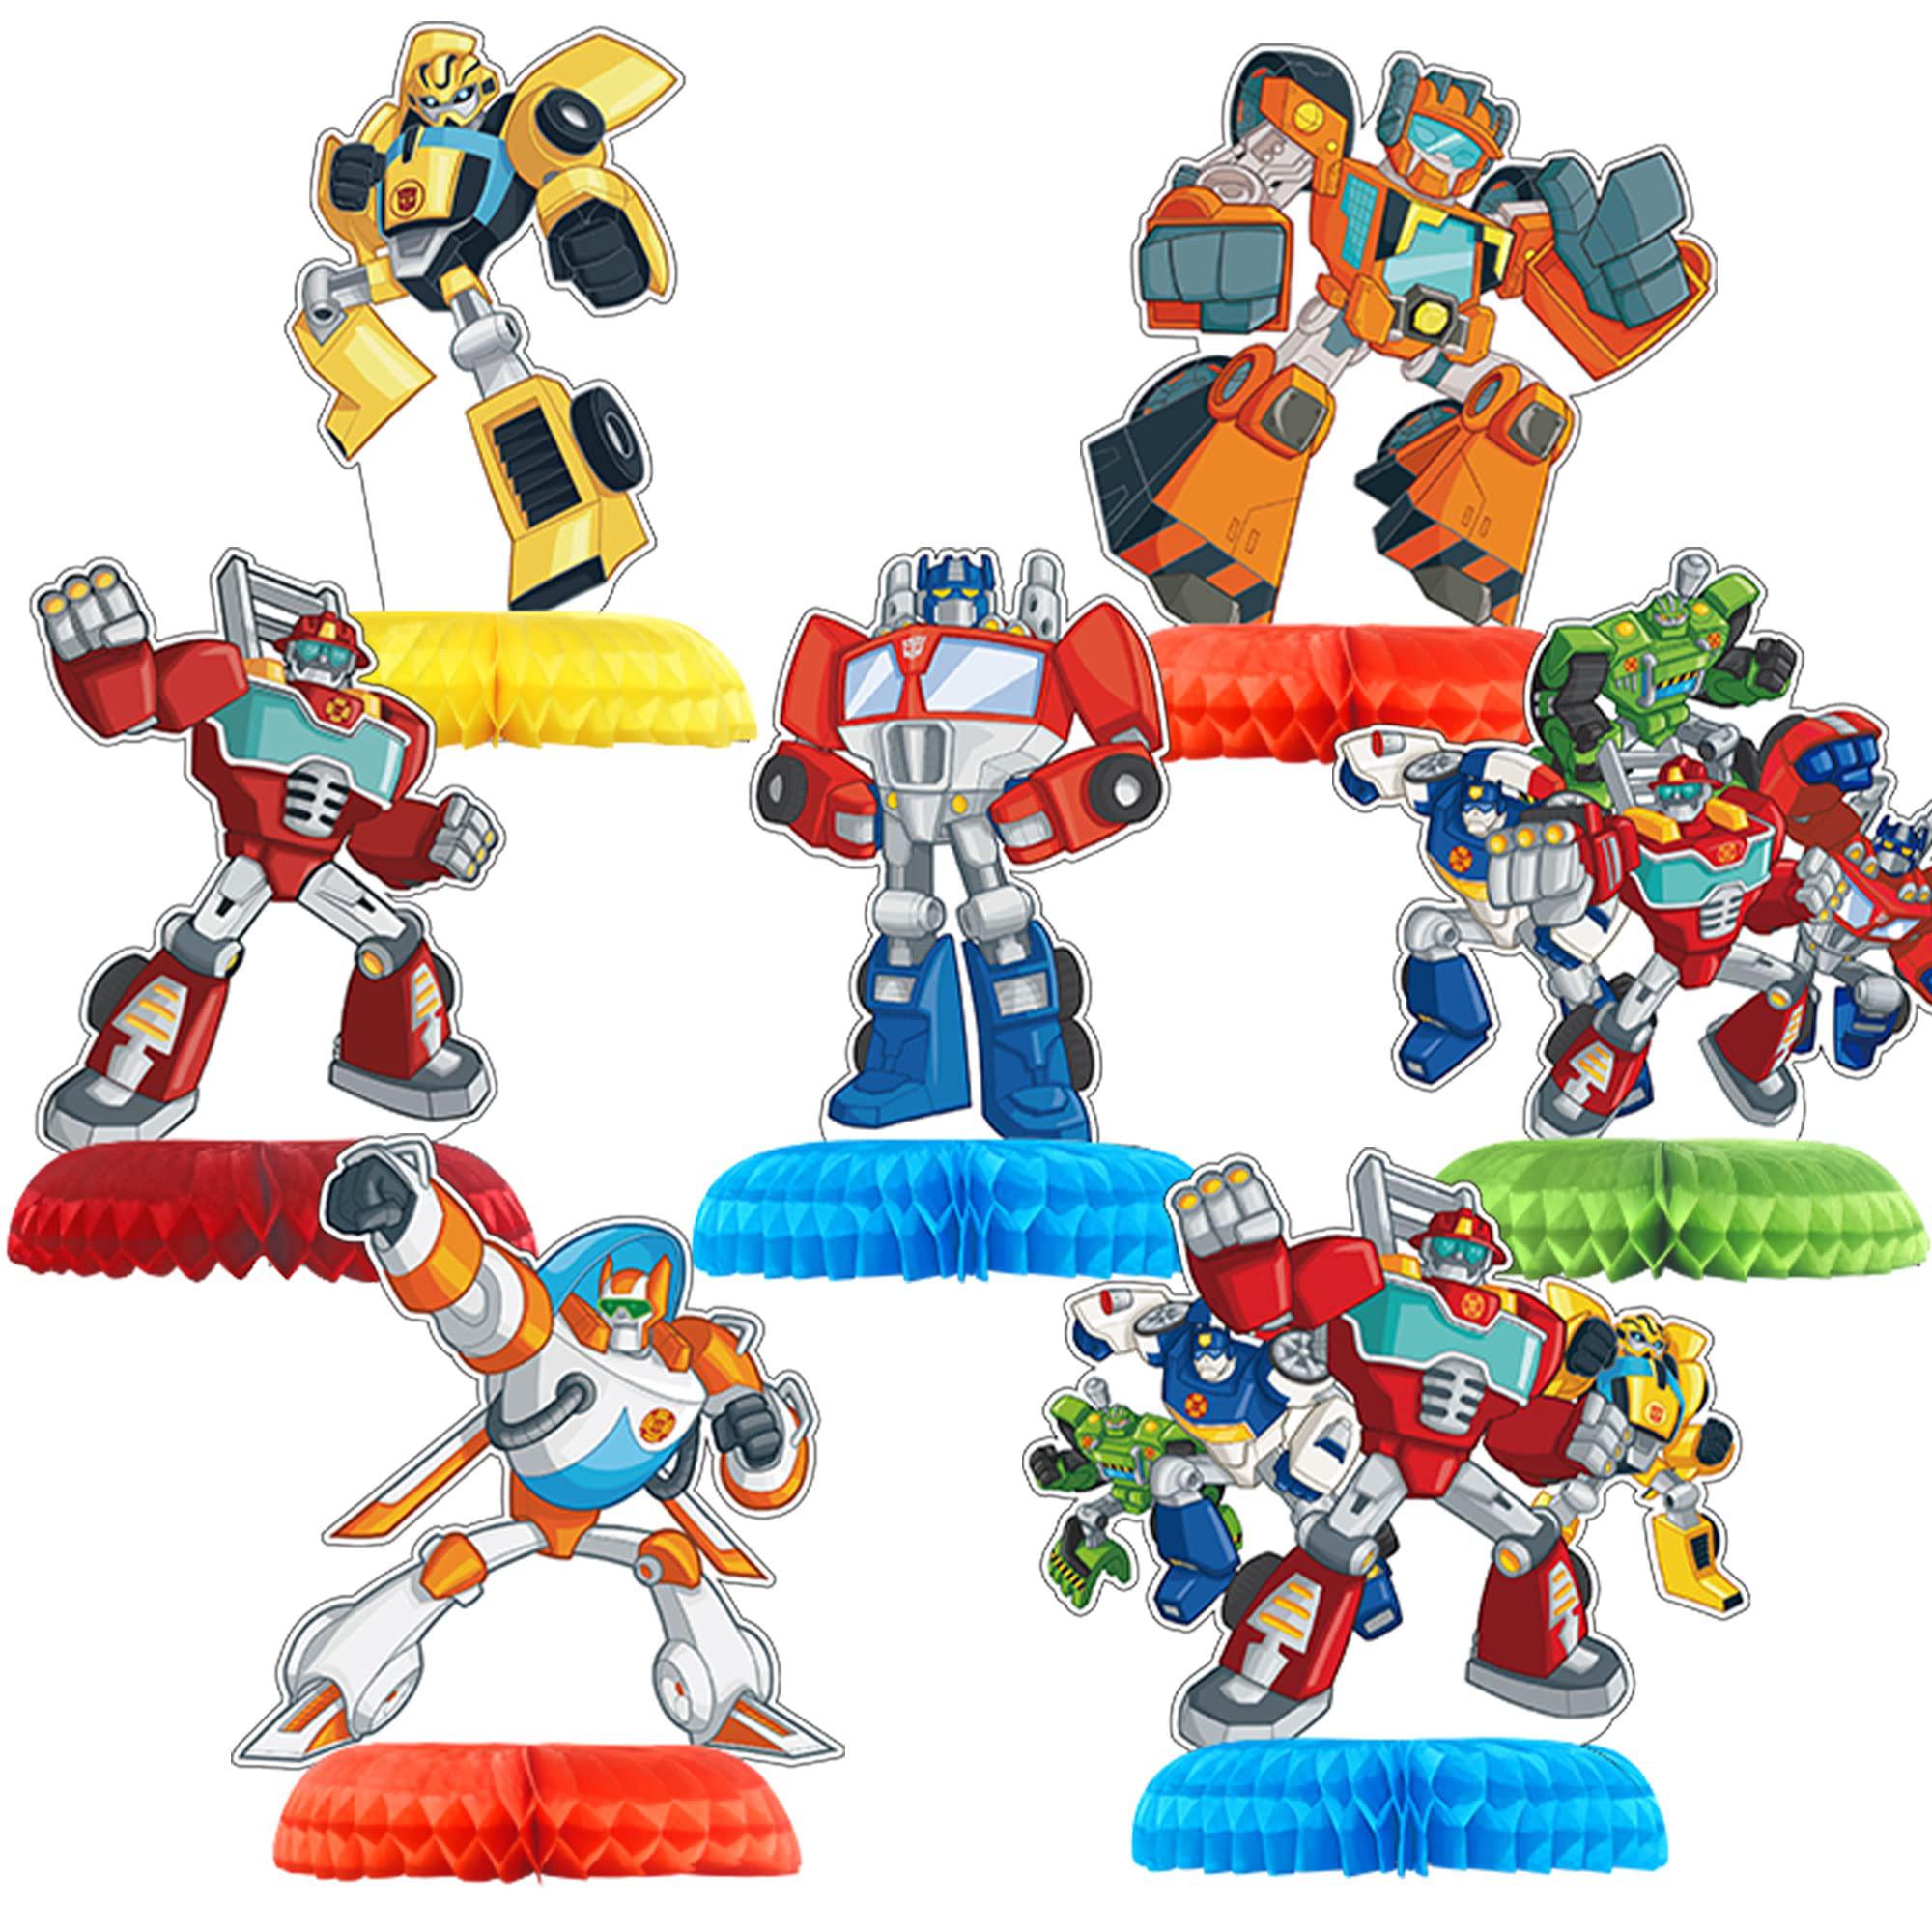 PINUO trans_formers rescue bots birthday party supplies, 7pcs trans_formers rescue bots theme table decorations honeycomb centerpie